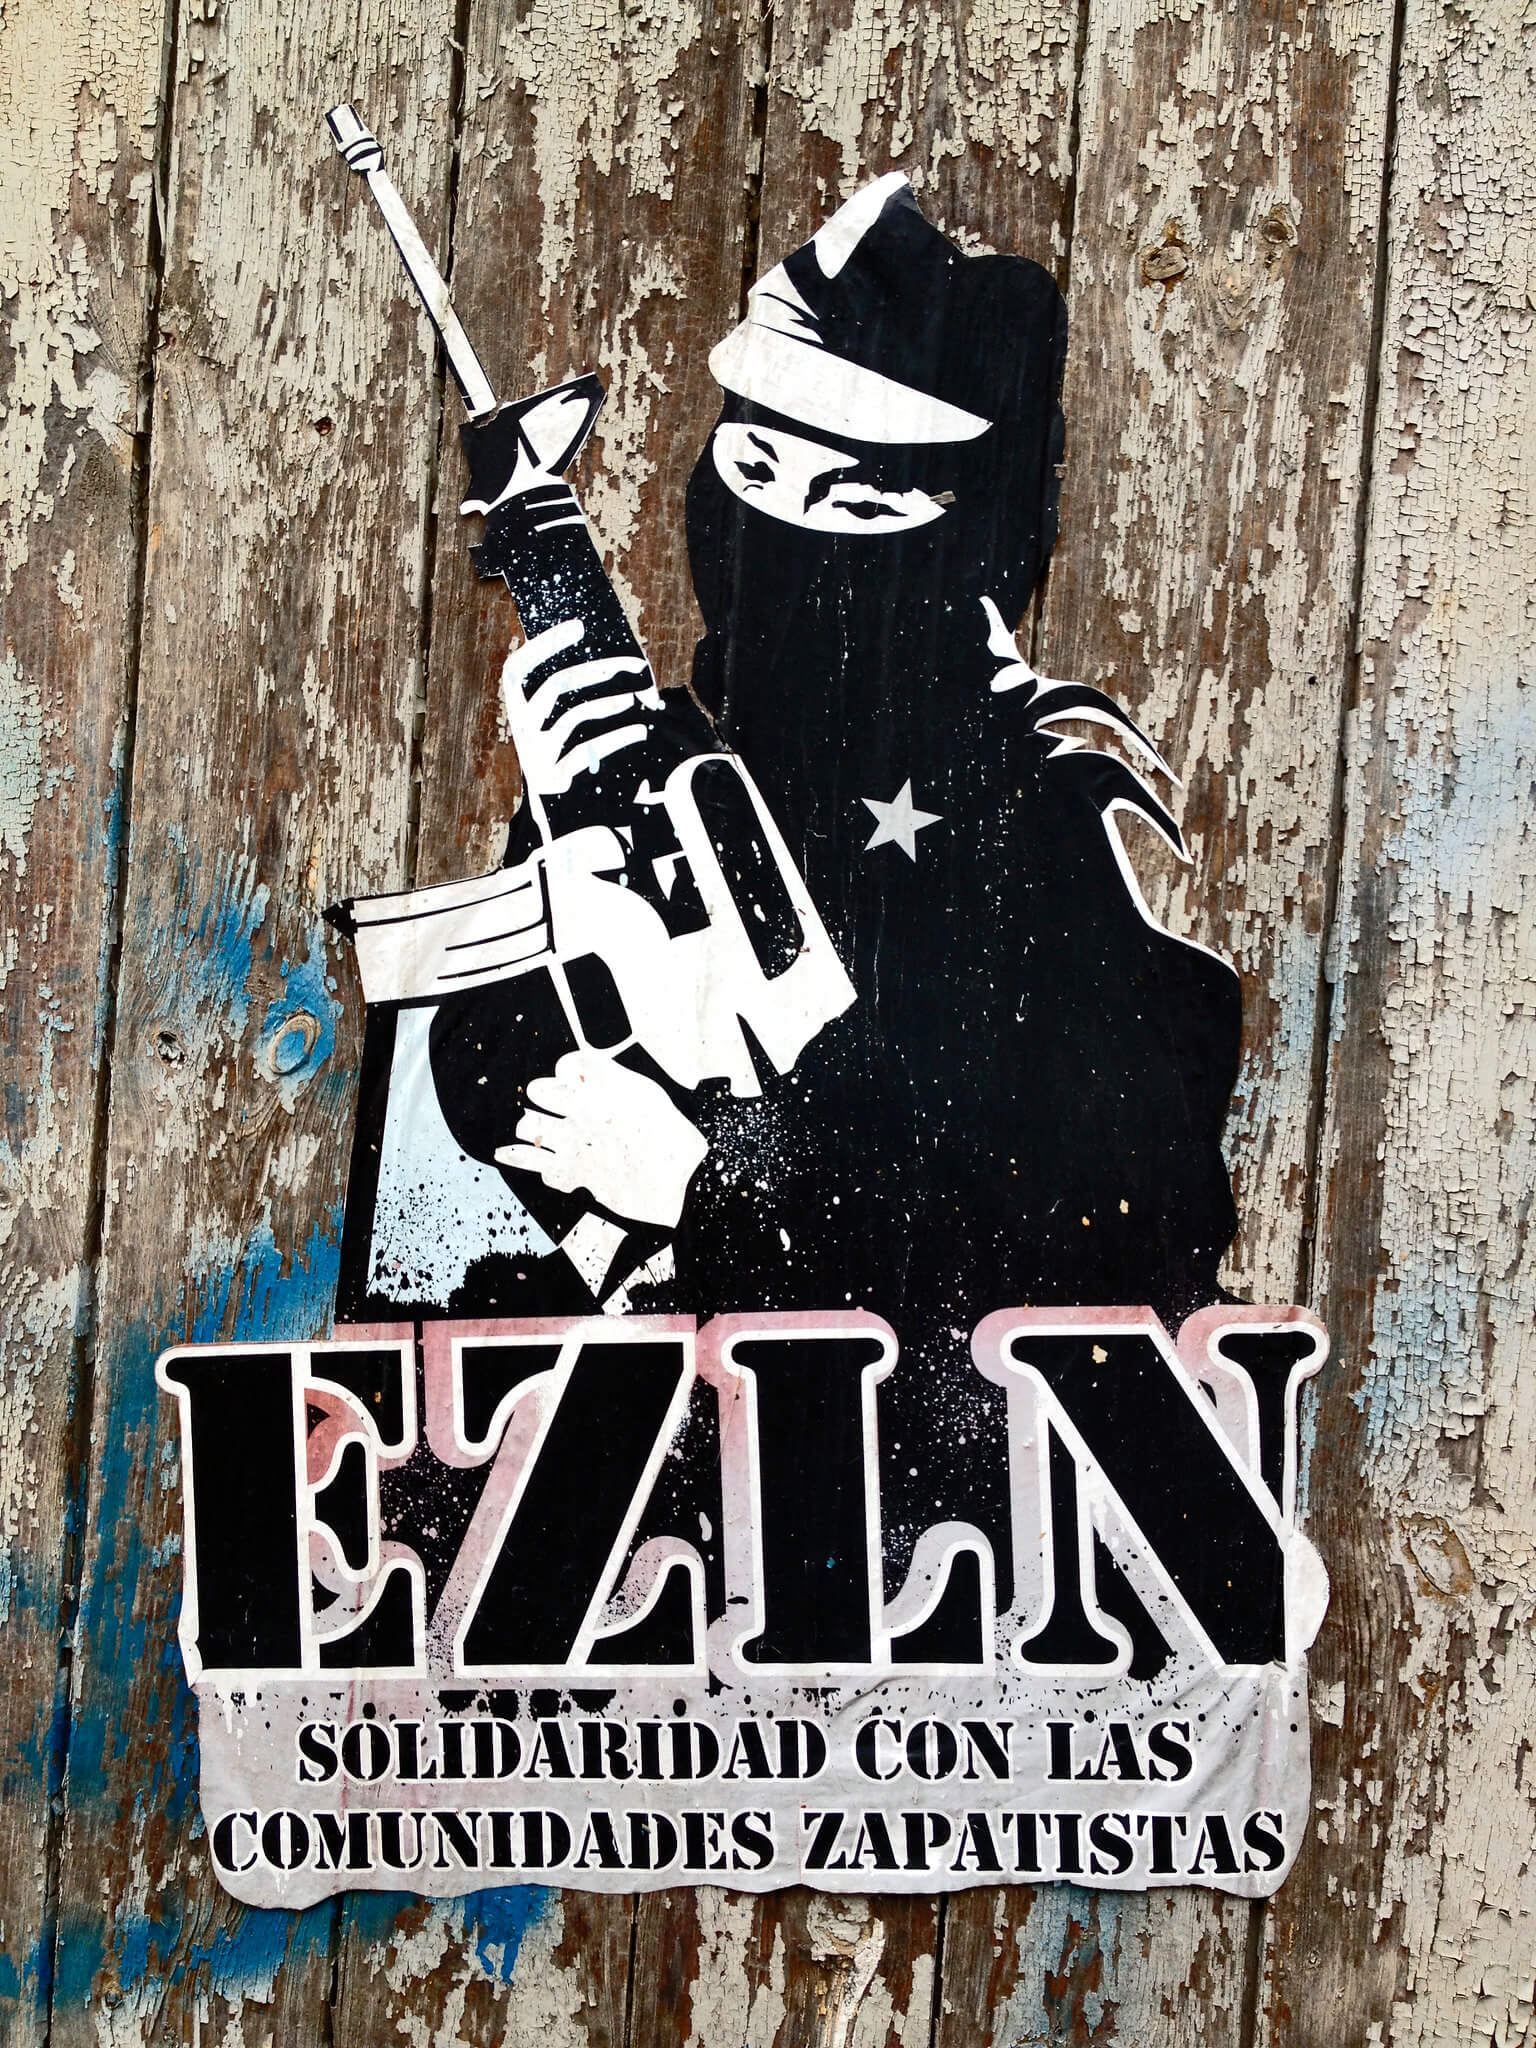 Resistance Profile: Zapatista Army of National Liberation (EZLN)